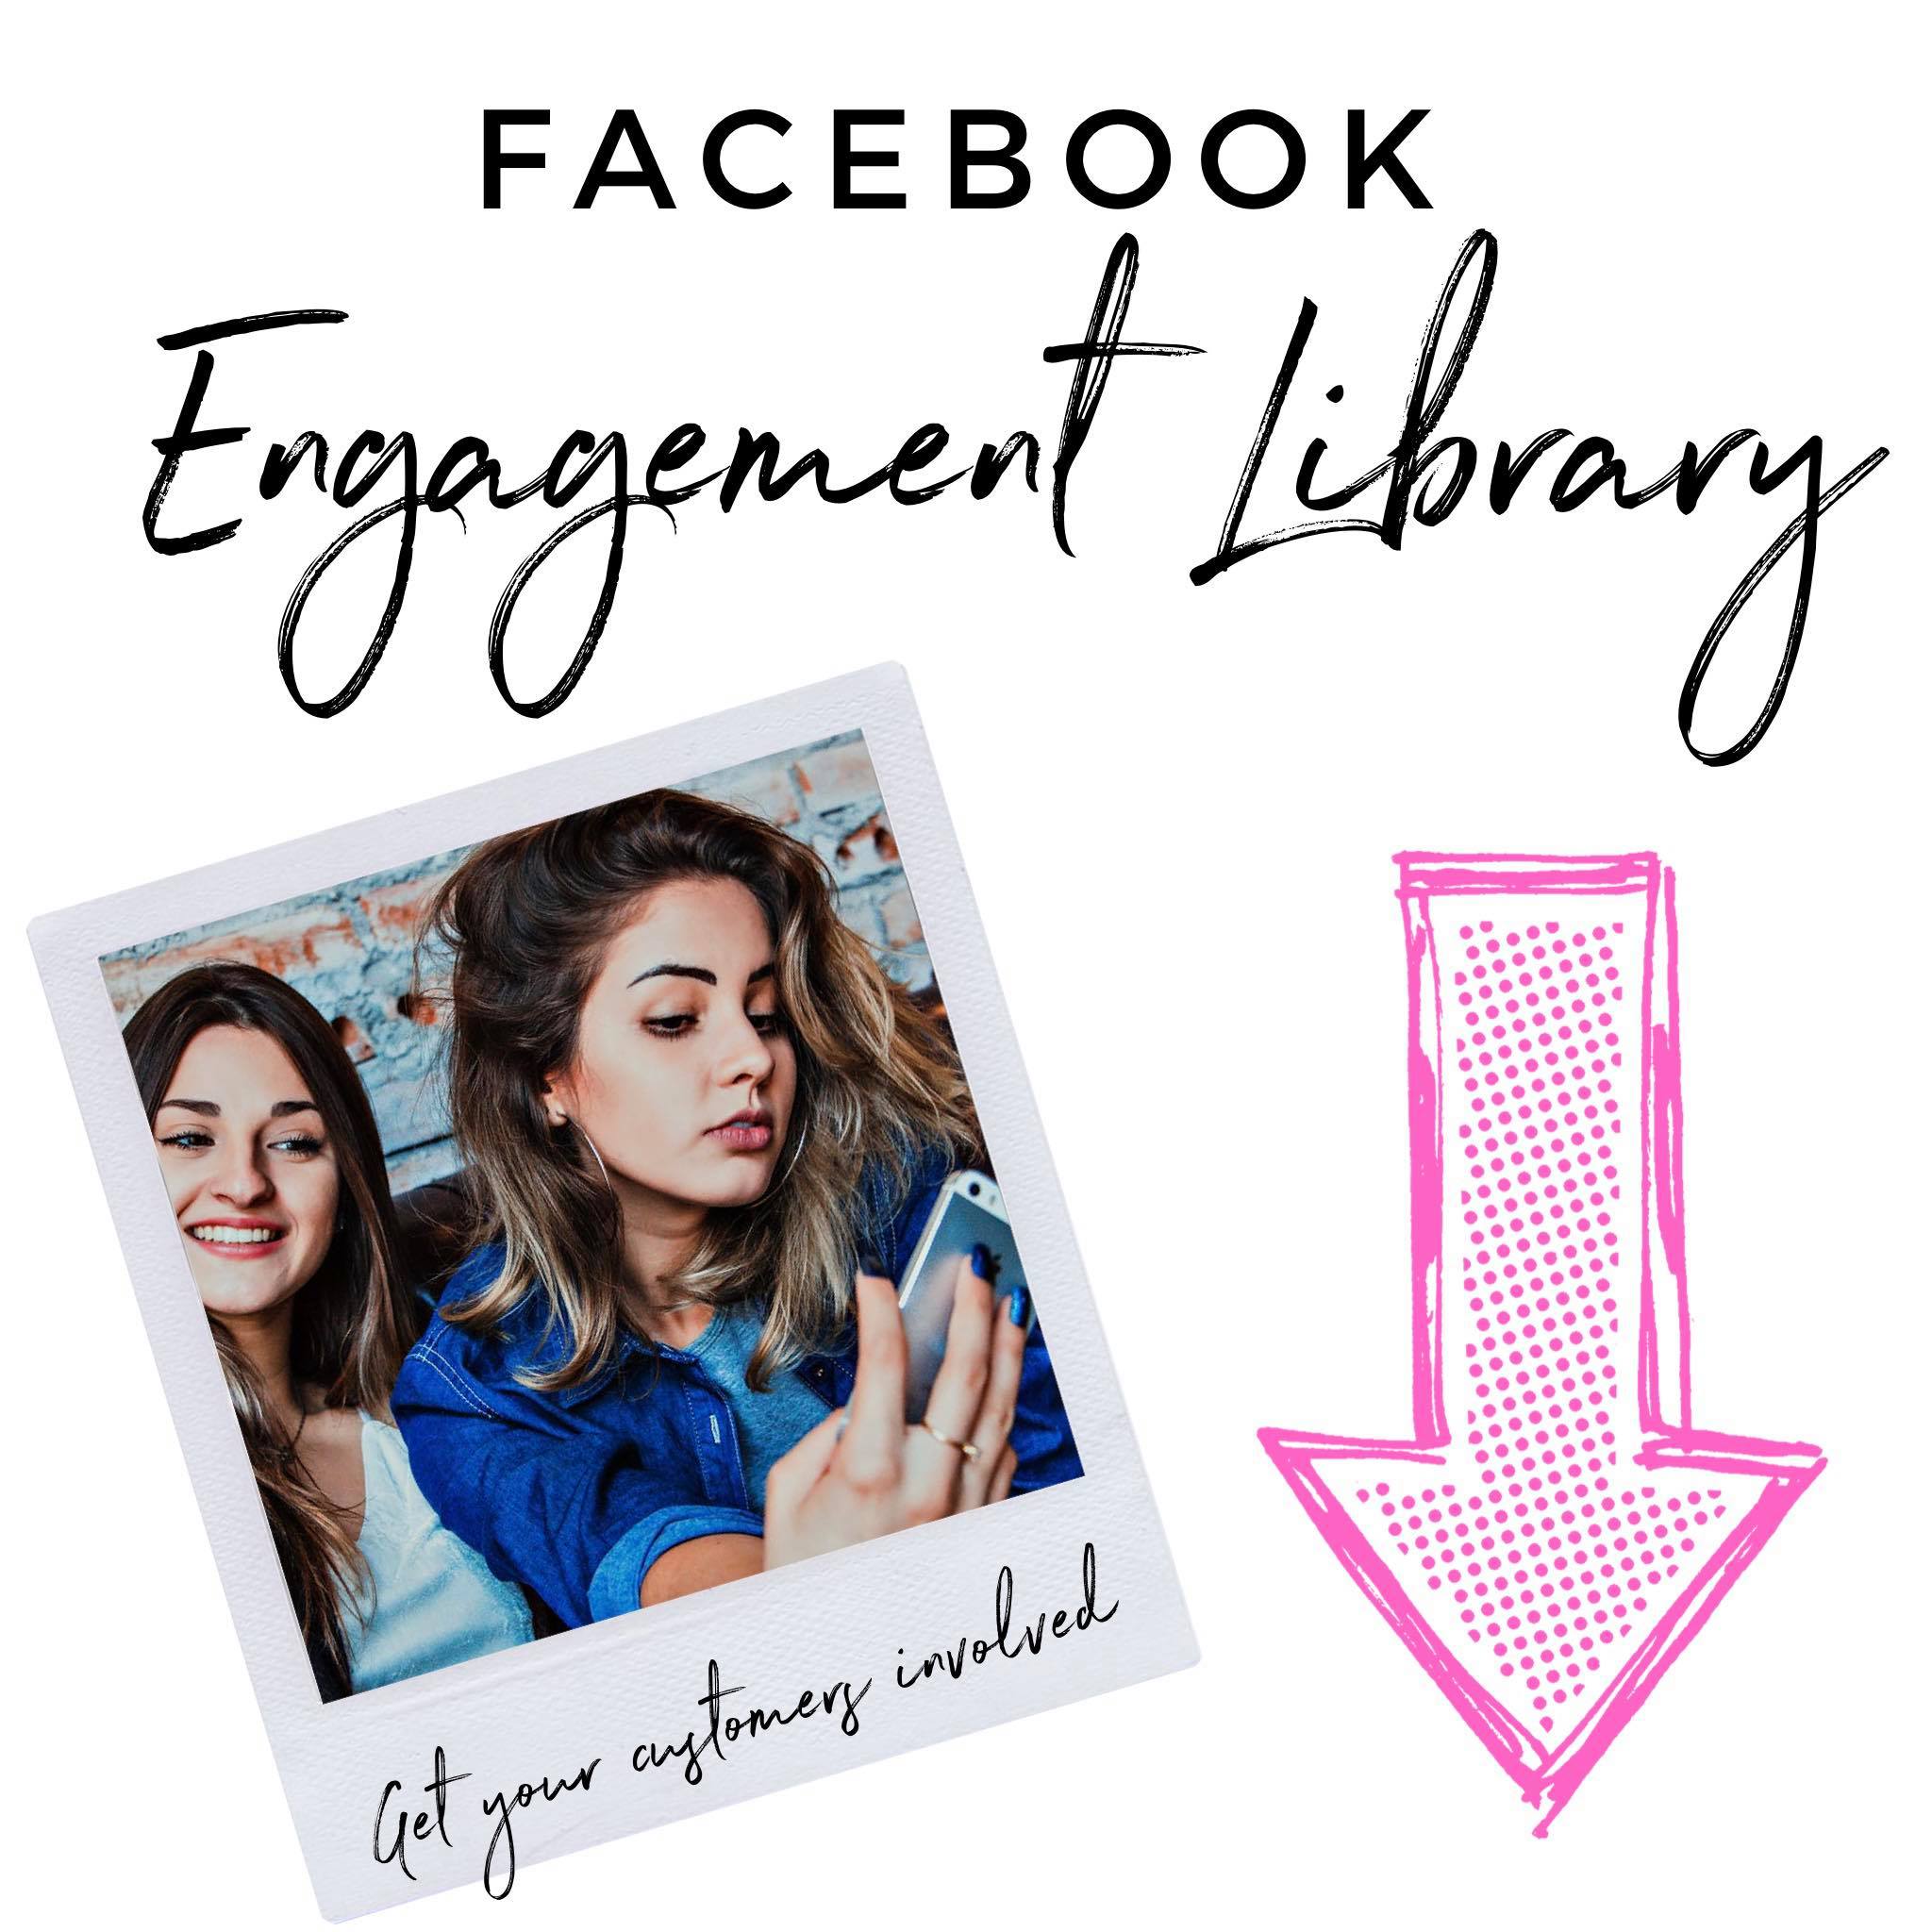 Ideas for engagement on Facebook Groups